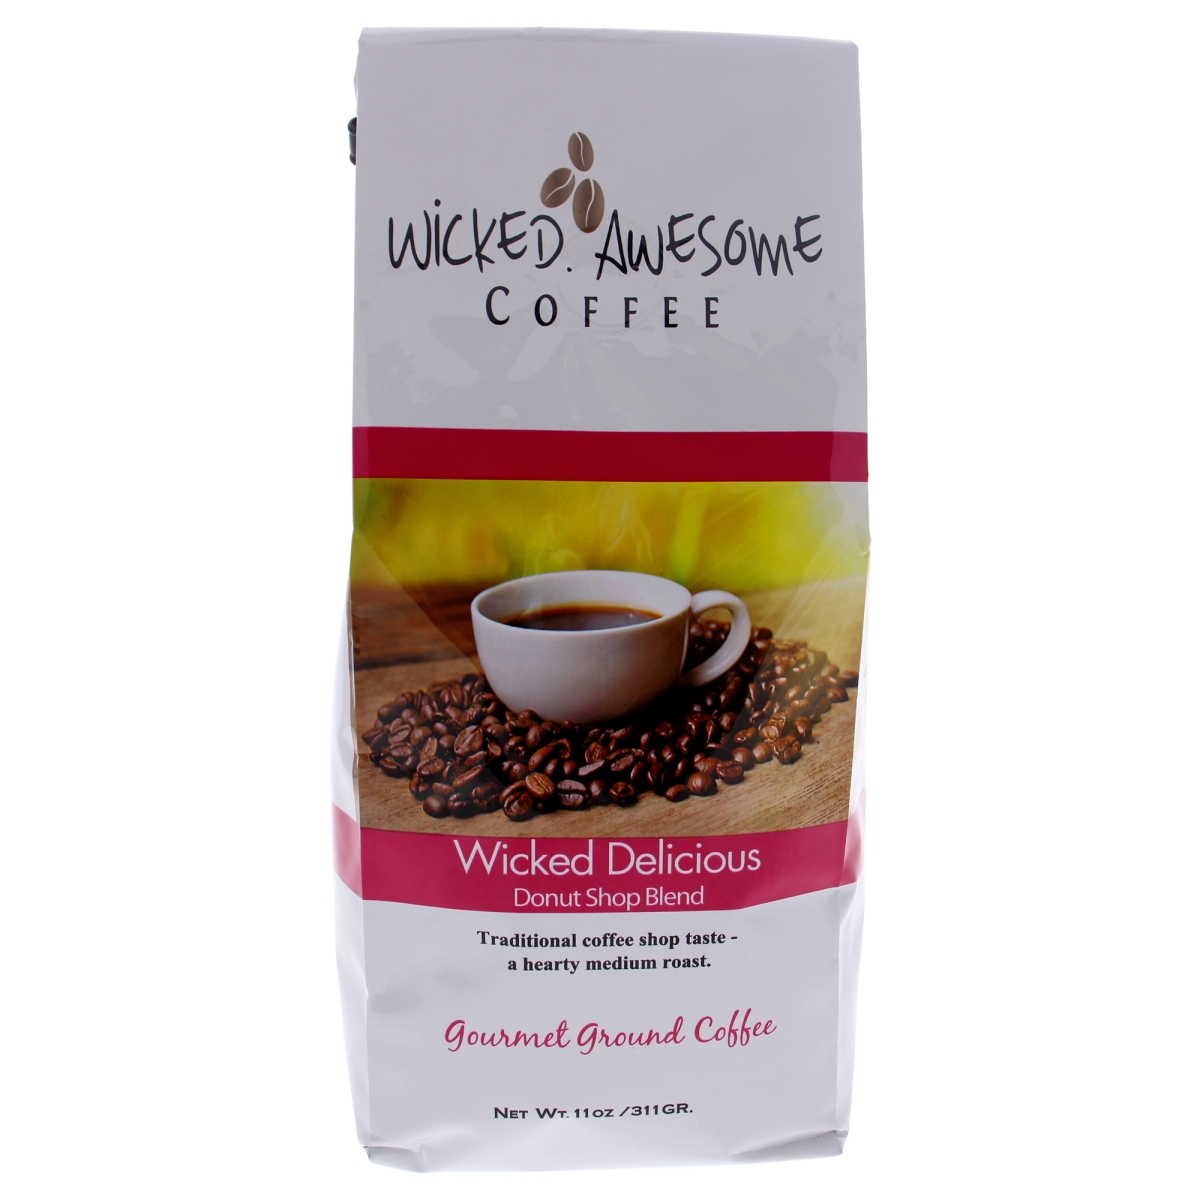 Picture of Bostons Best I0096780 11 oz Wicked Awesome Wicked Delicious Donut Shop Blend Coffee